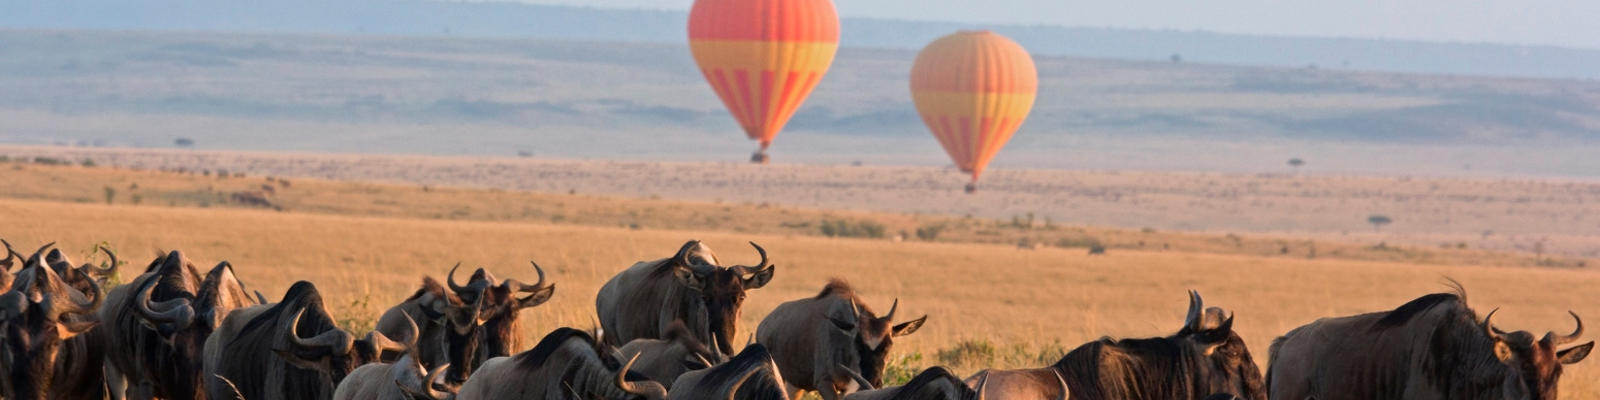 A herd of wildebeest walking across the desert with hot air balloons in the background 